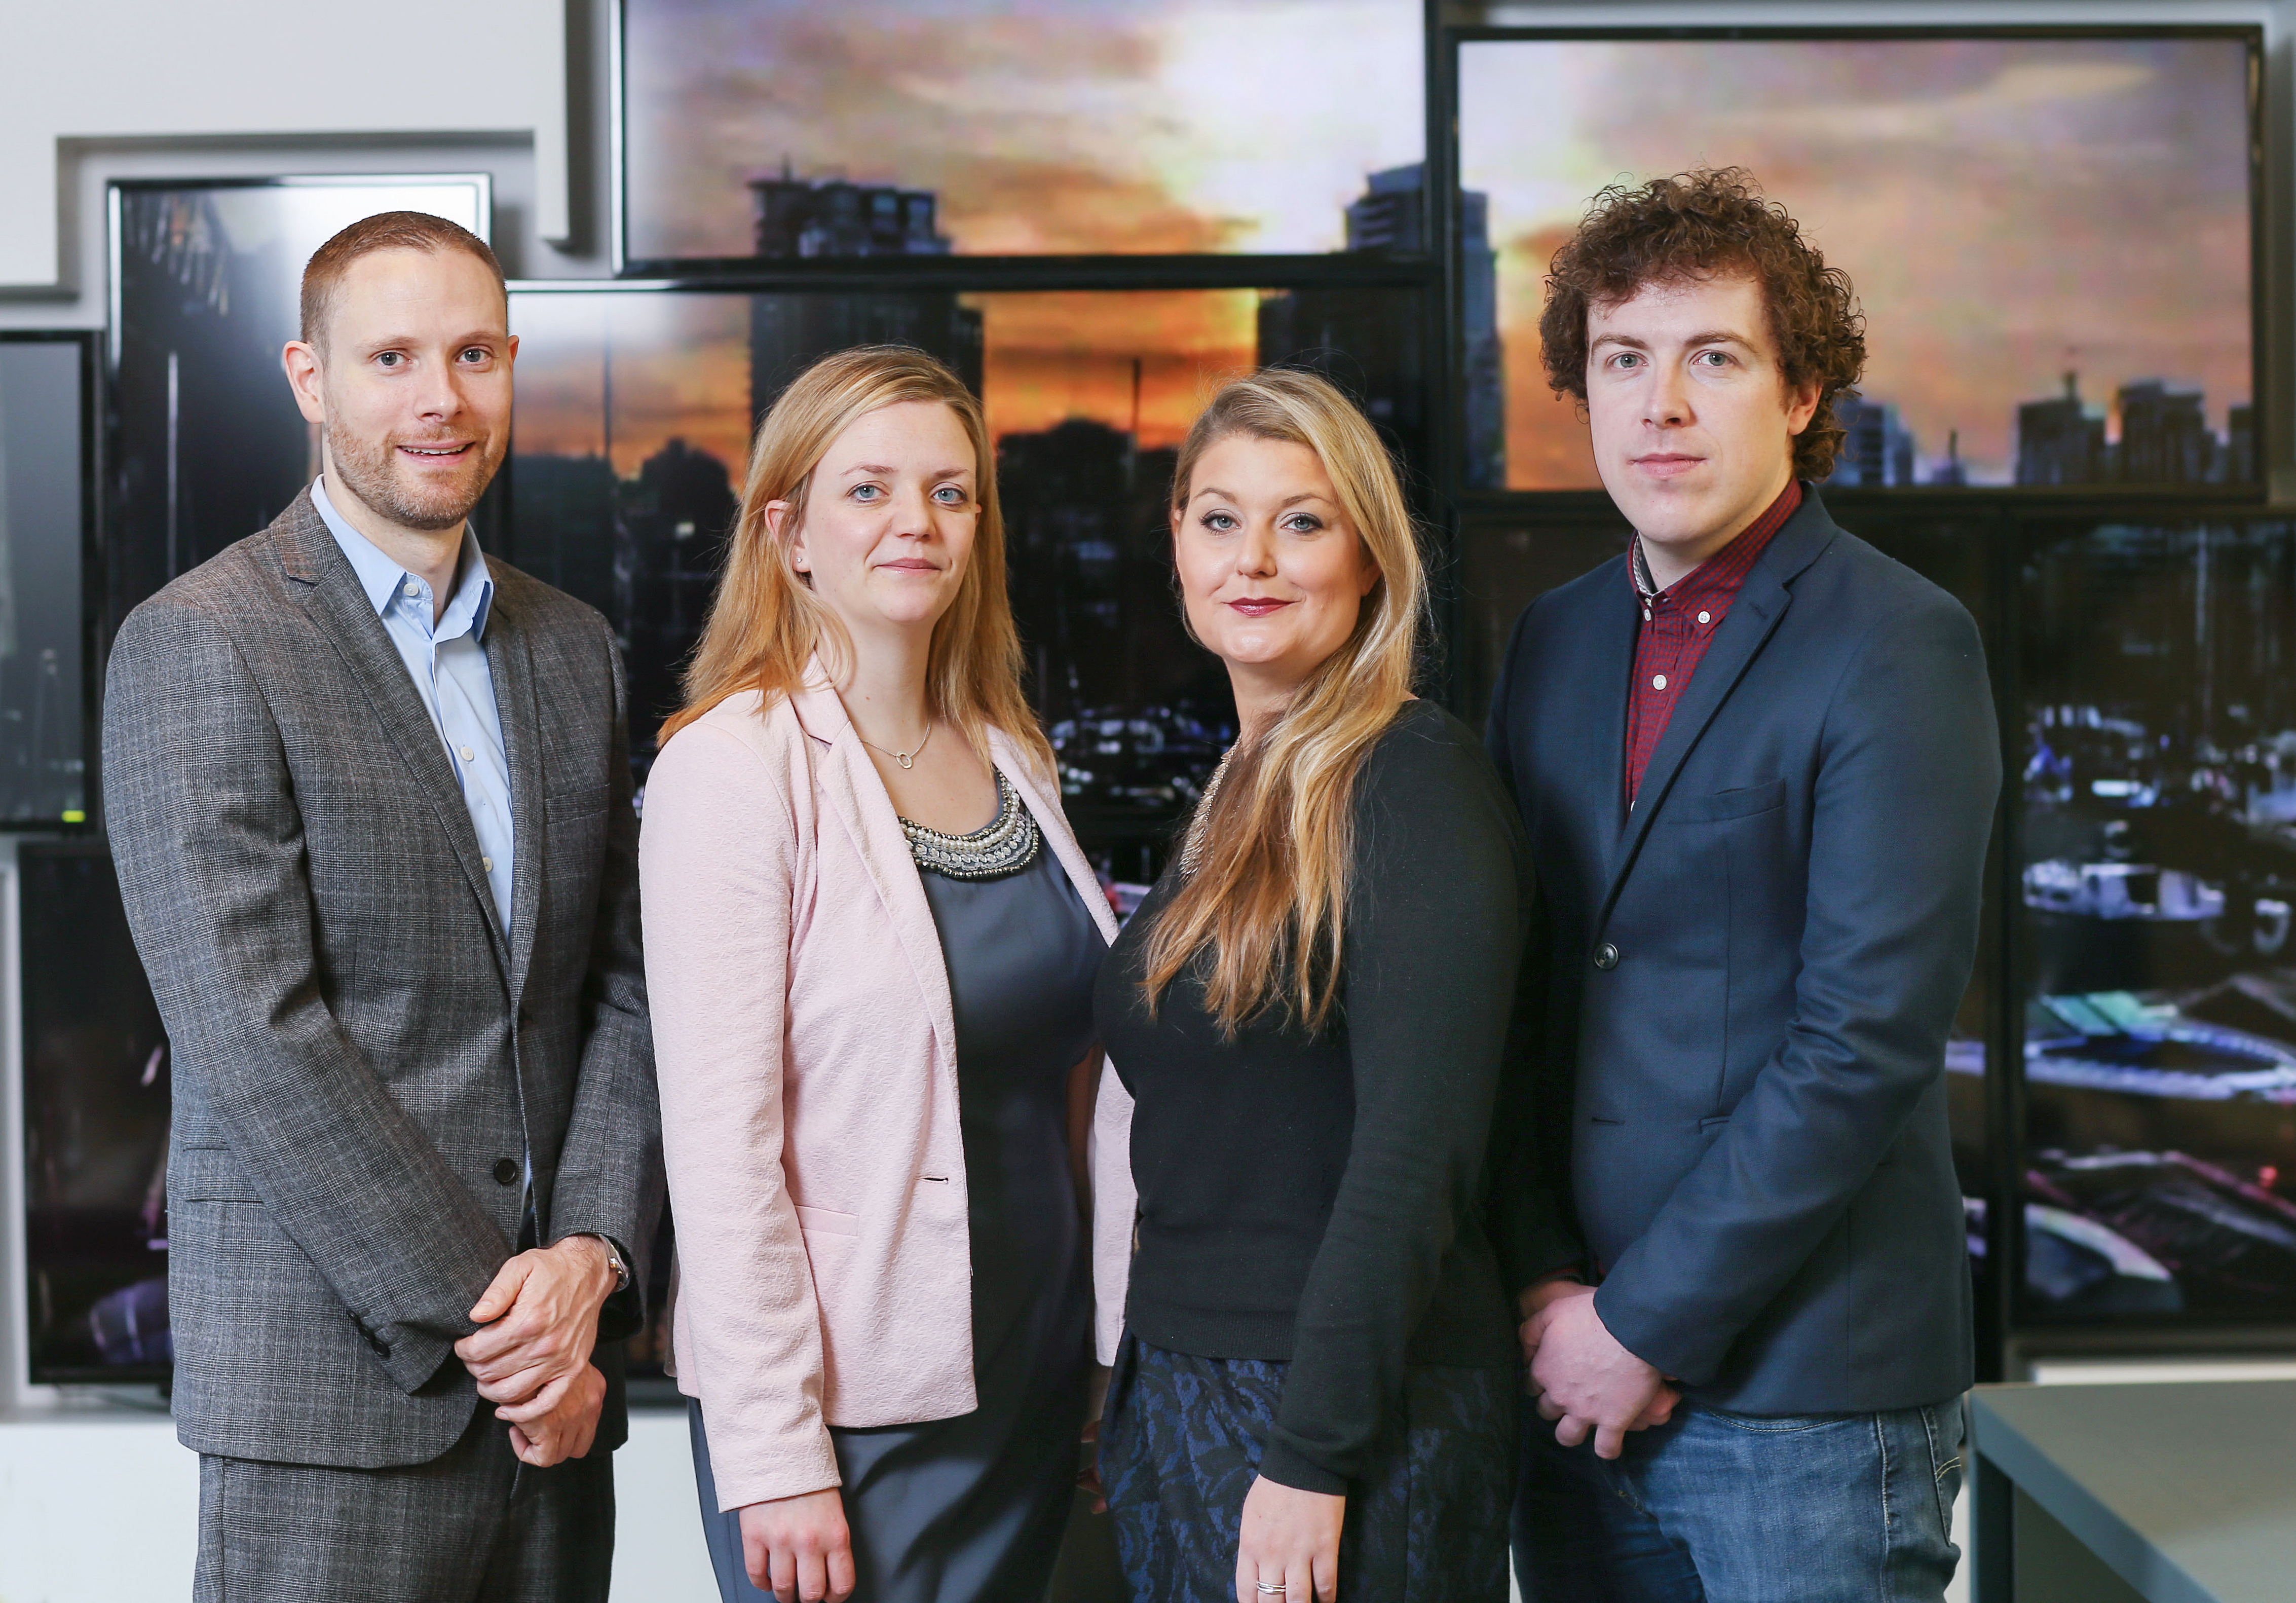 Mediavest has announced several key appointments as part of a restructure within the agency